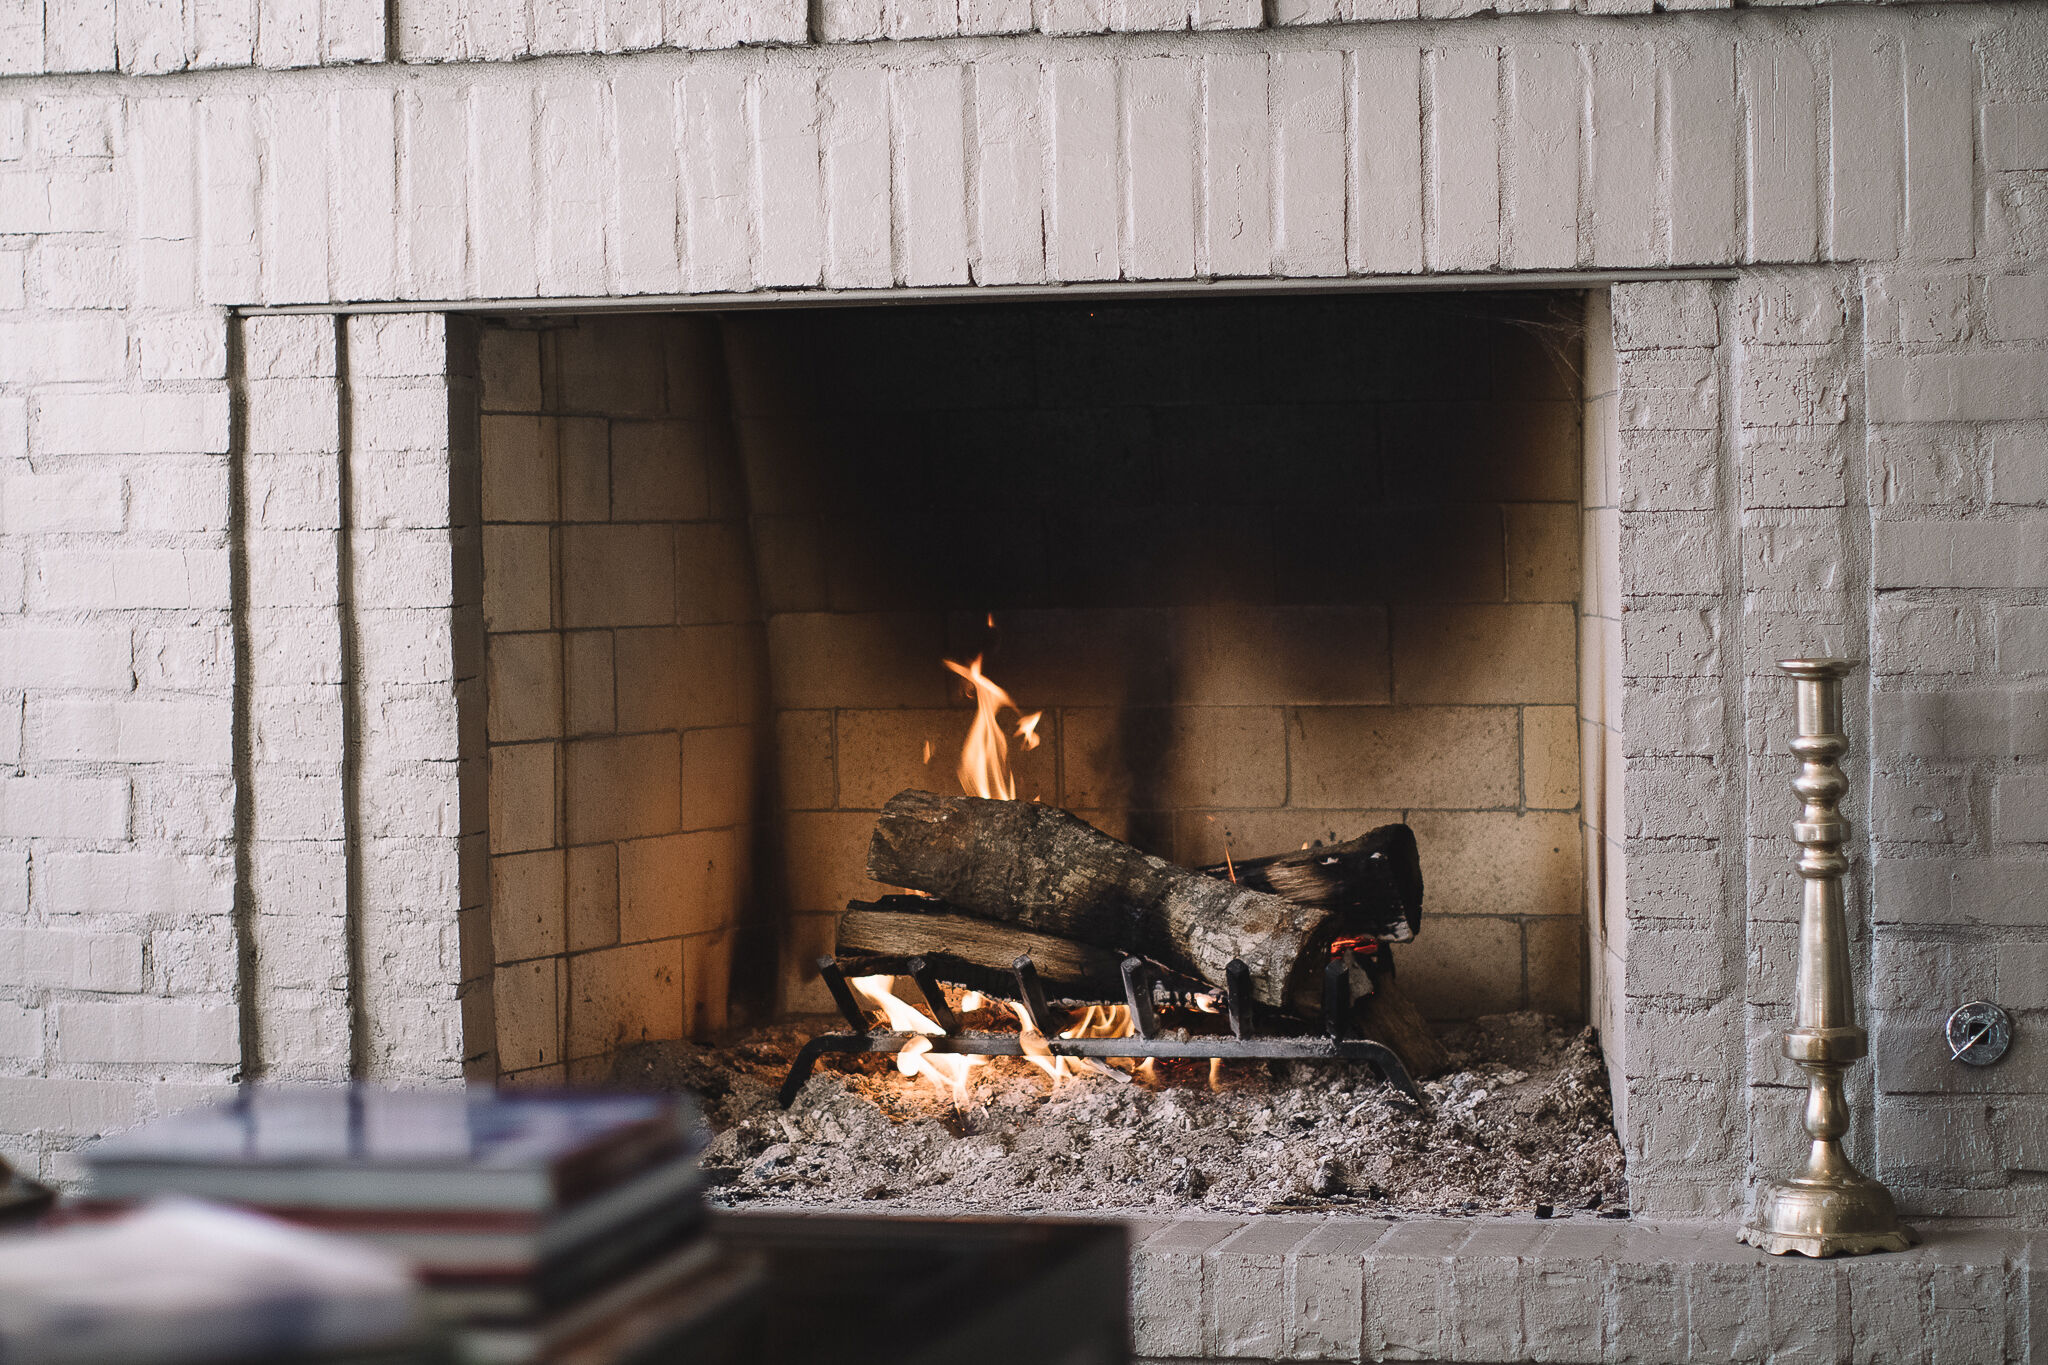 A close-up view of a masonry, wood burning fireplace with a traditional black grate and burning logs.